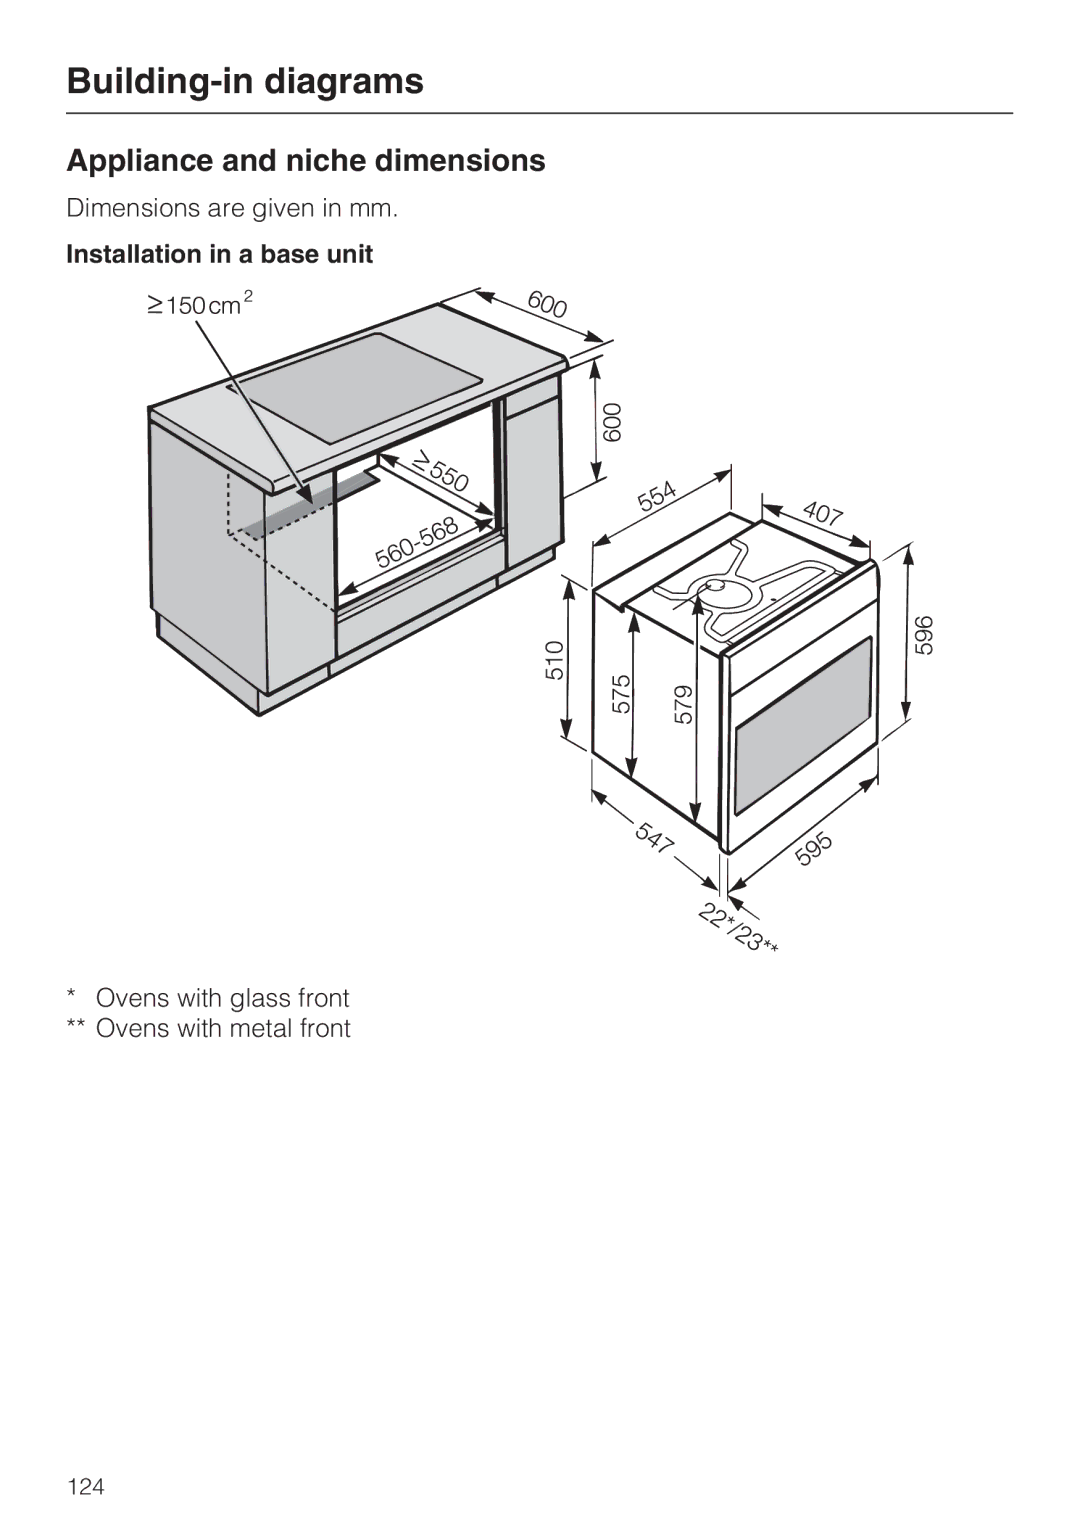 Miele 10 110 510 Building-in diagrams, Appliance and niche dimensions, Installation in a base unit 